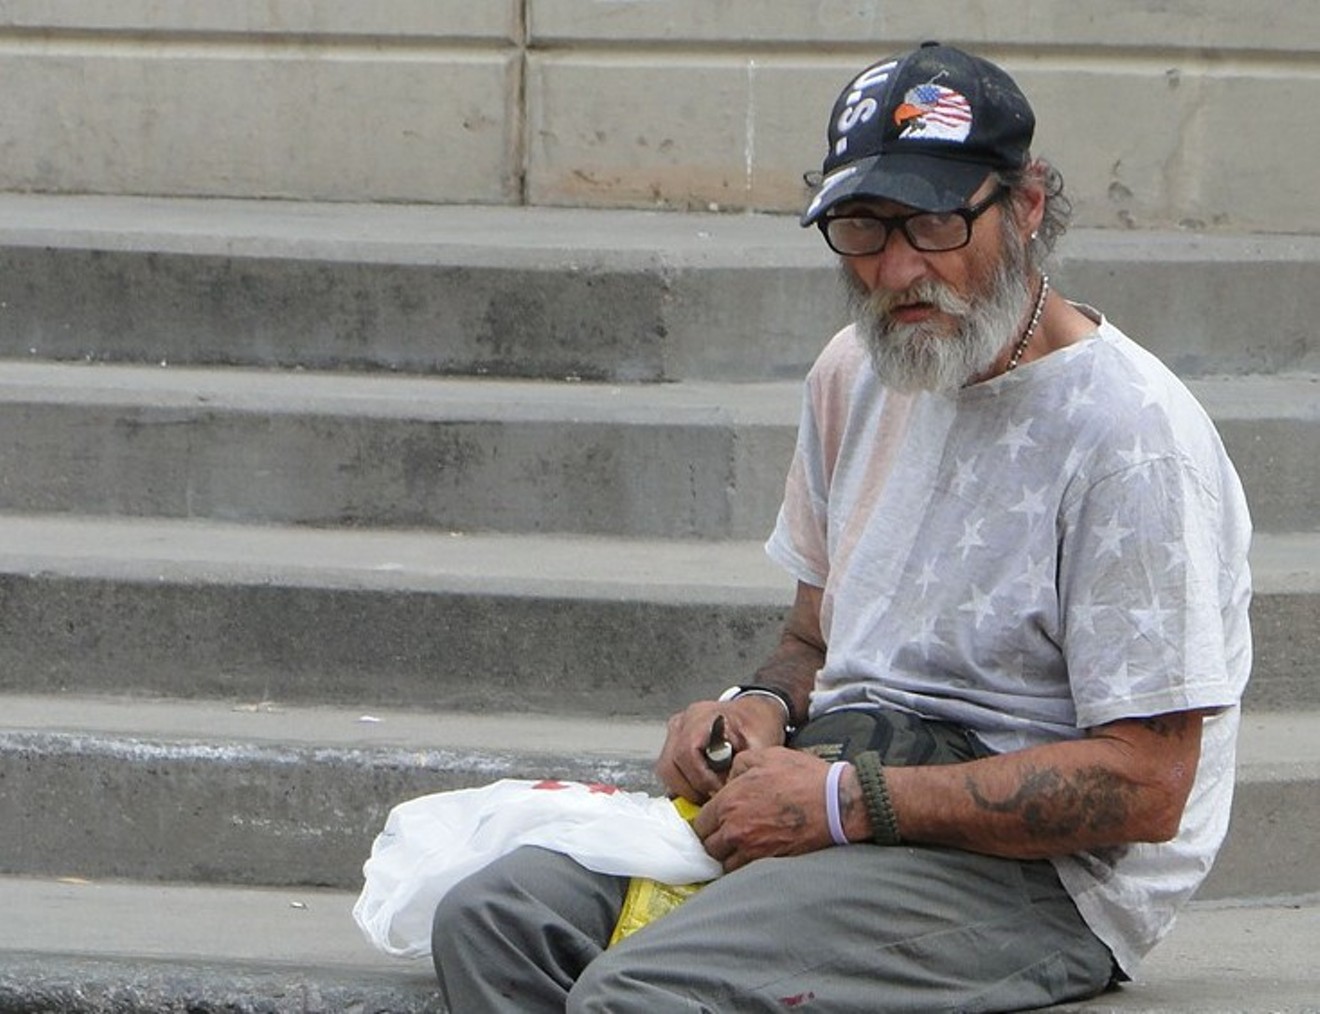 Brian Noeo, 58, was one of many homeless people who was moved out of Margaret T. Hance Park during the Final Four weekend